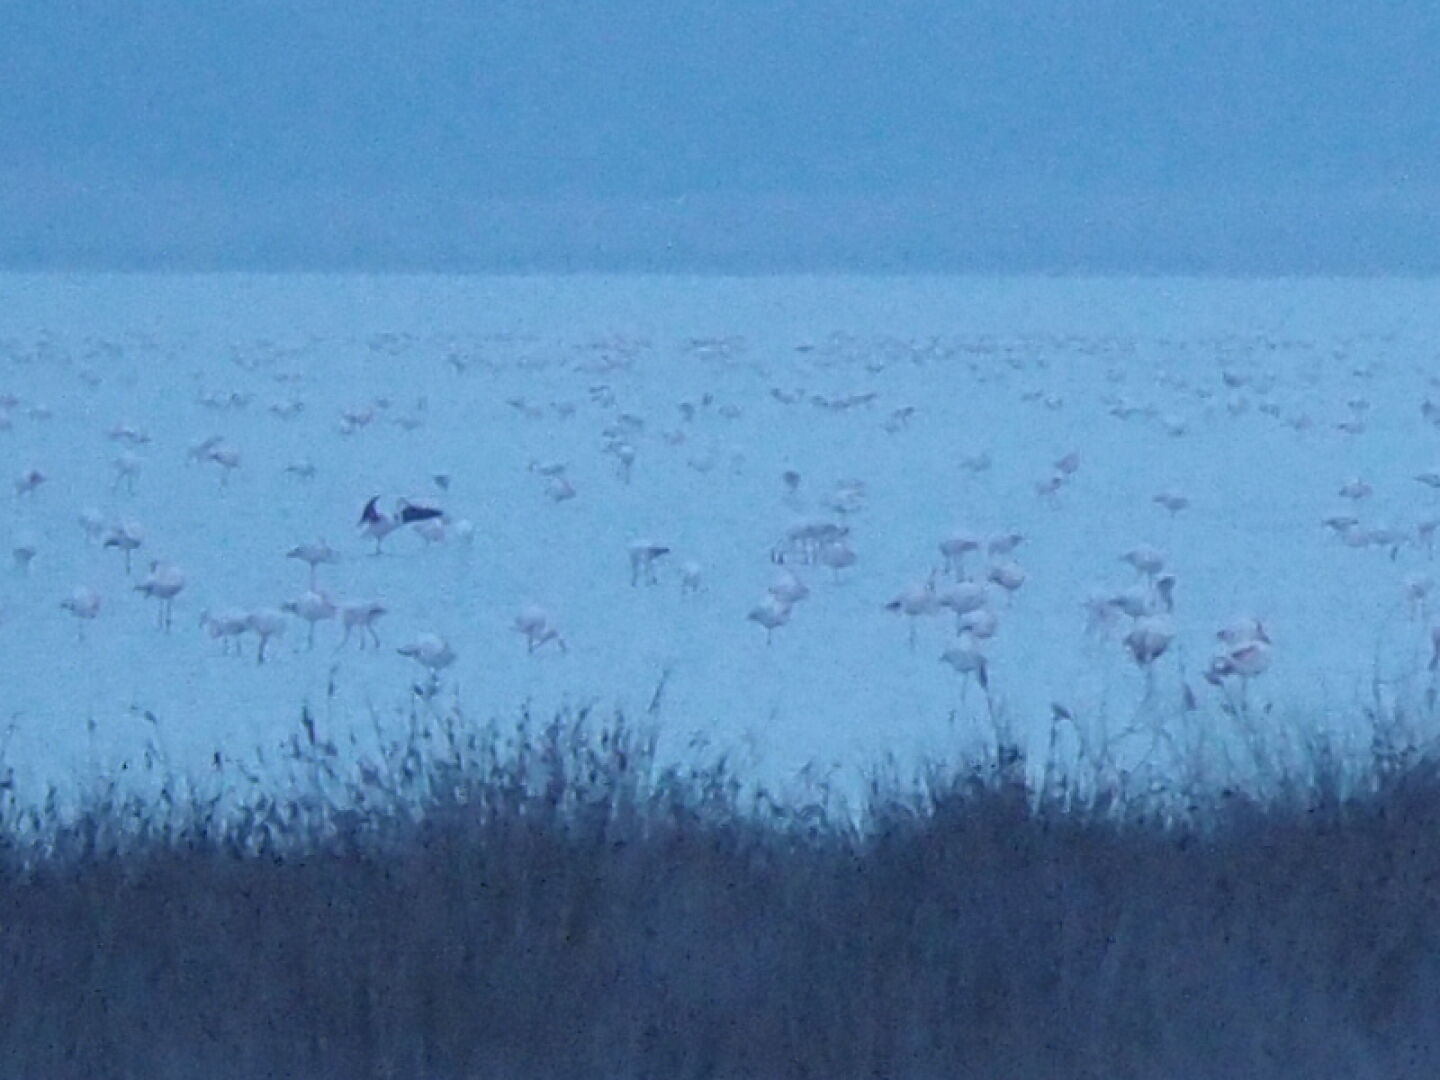 As you can clearly see, there are huge flocks of flamingos in the salt lake on the Akrotiri peninsula.